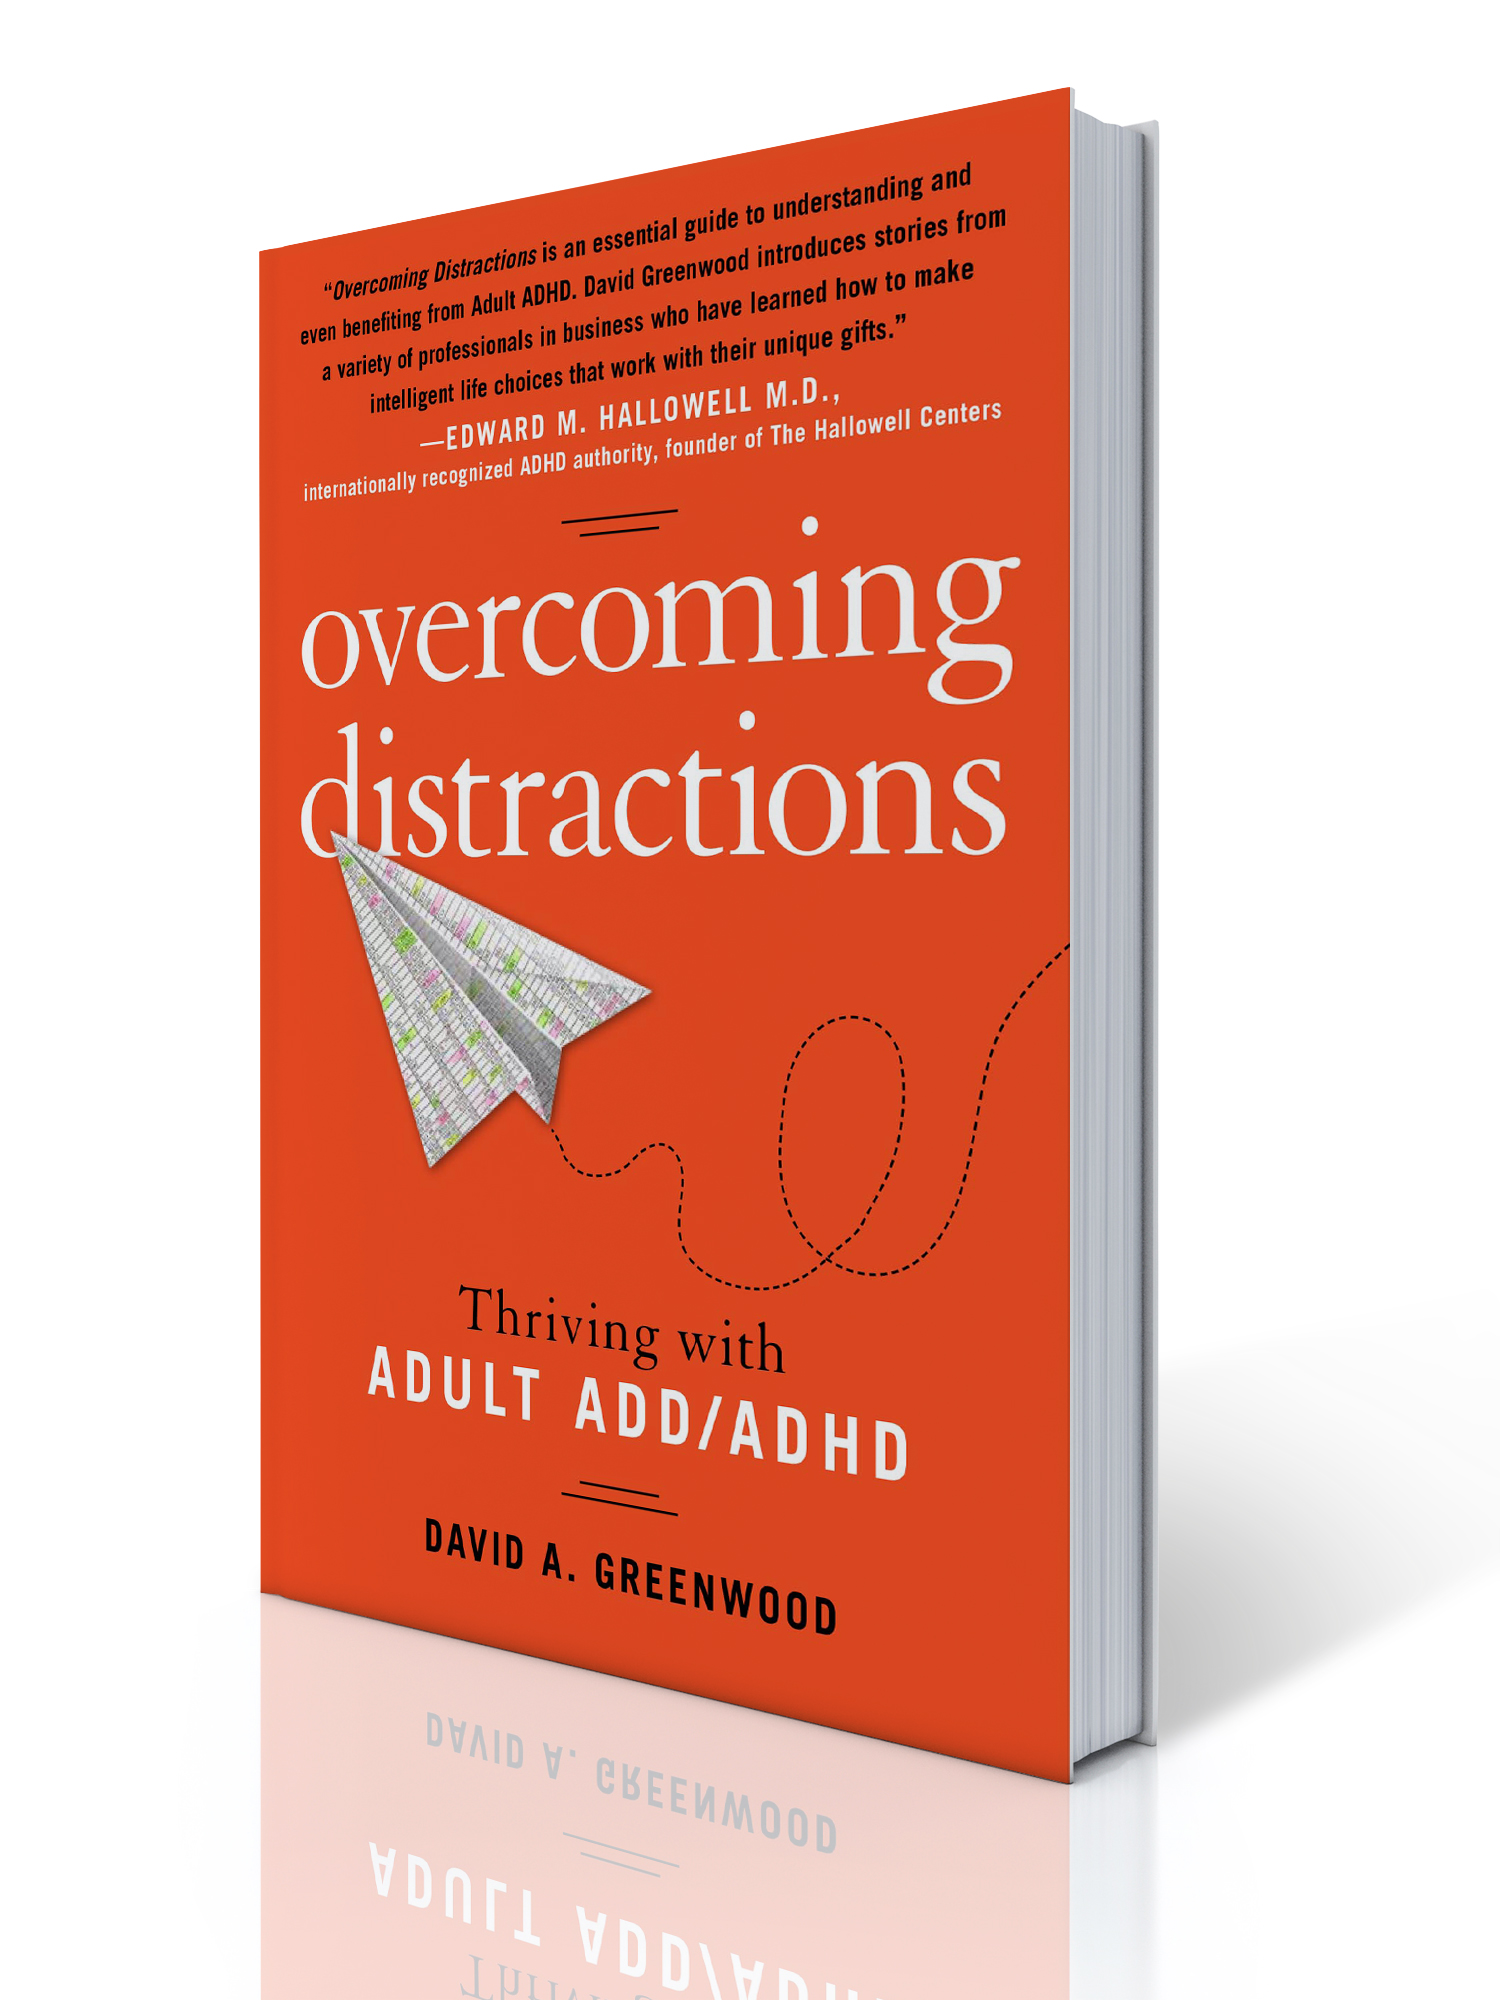 Overcoming Distractions, Thriving with Adult ADD/ADHD